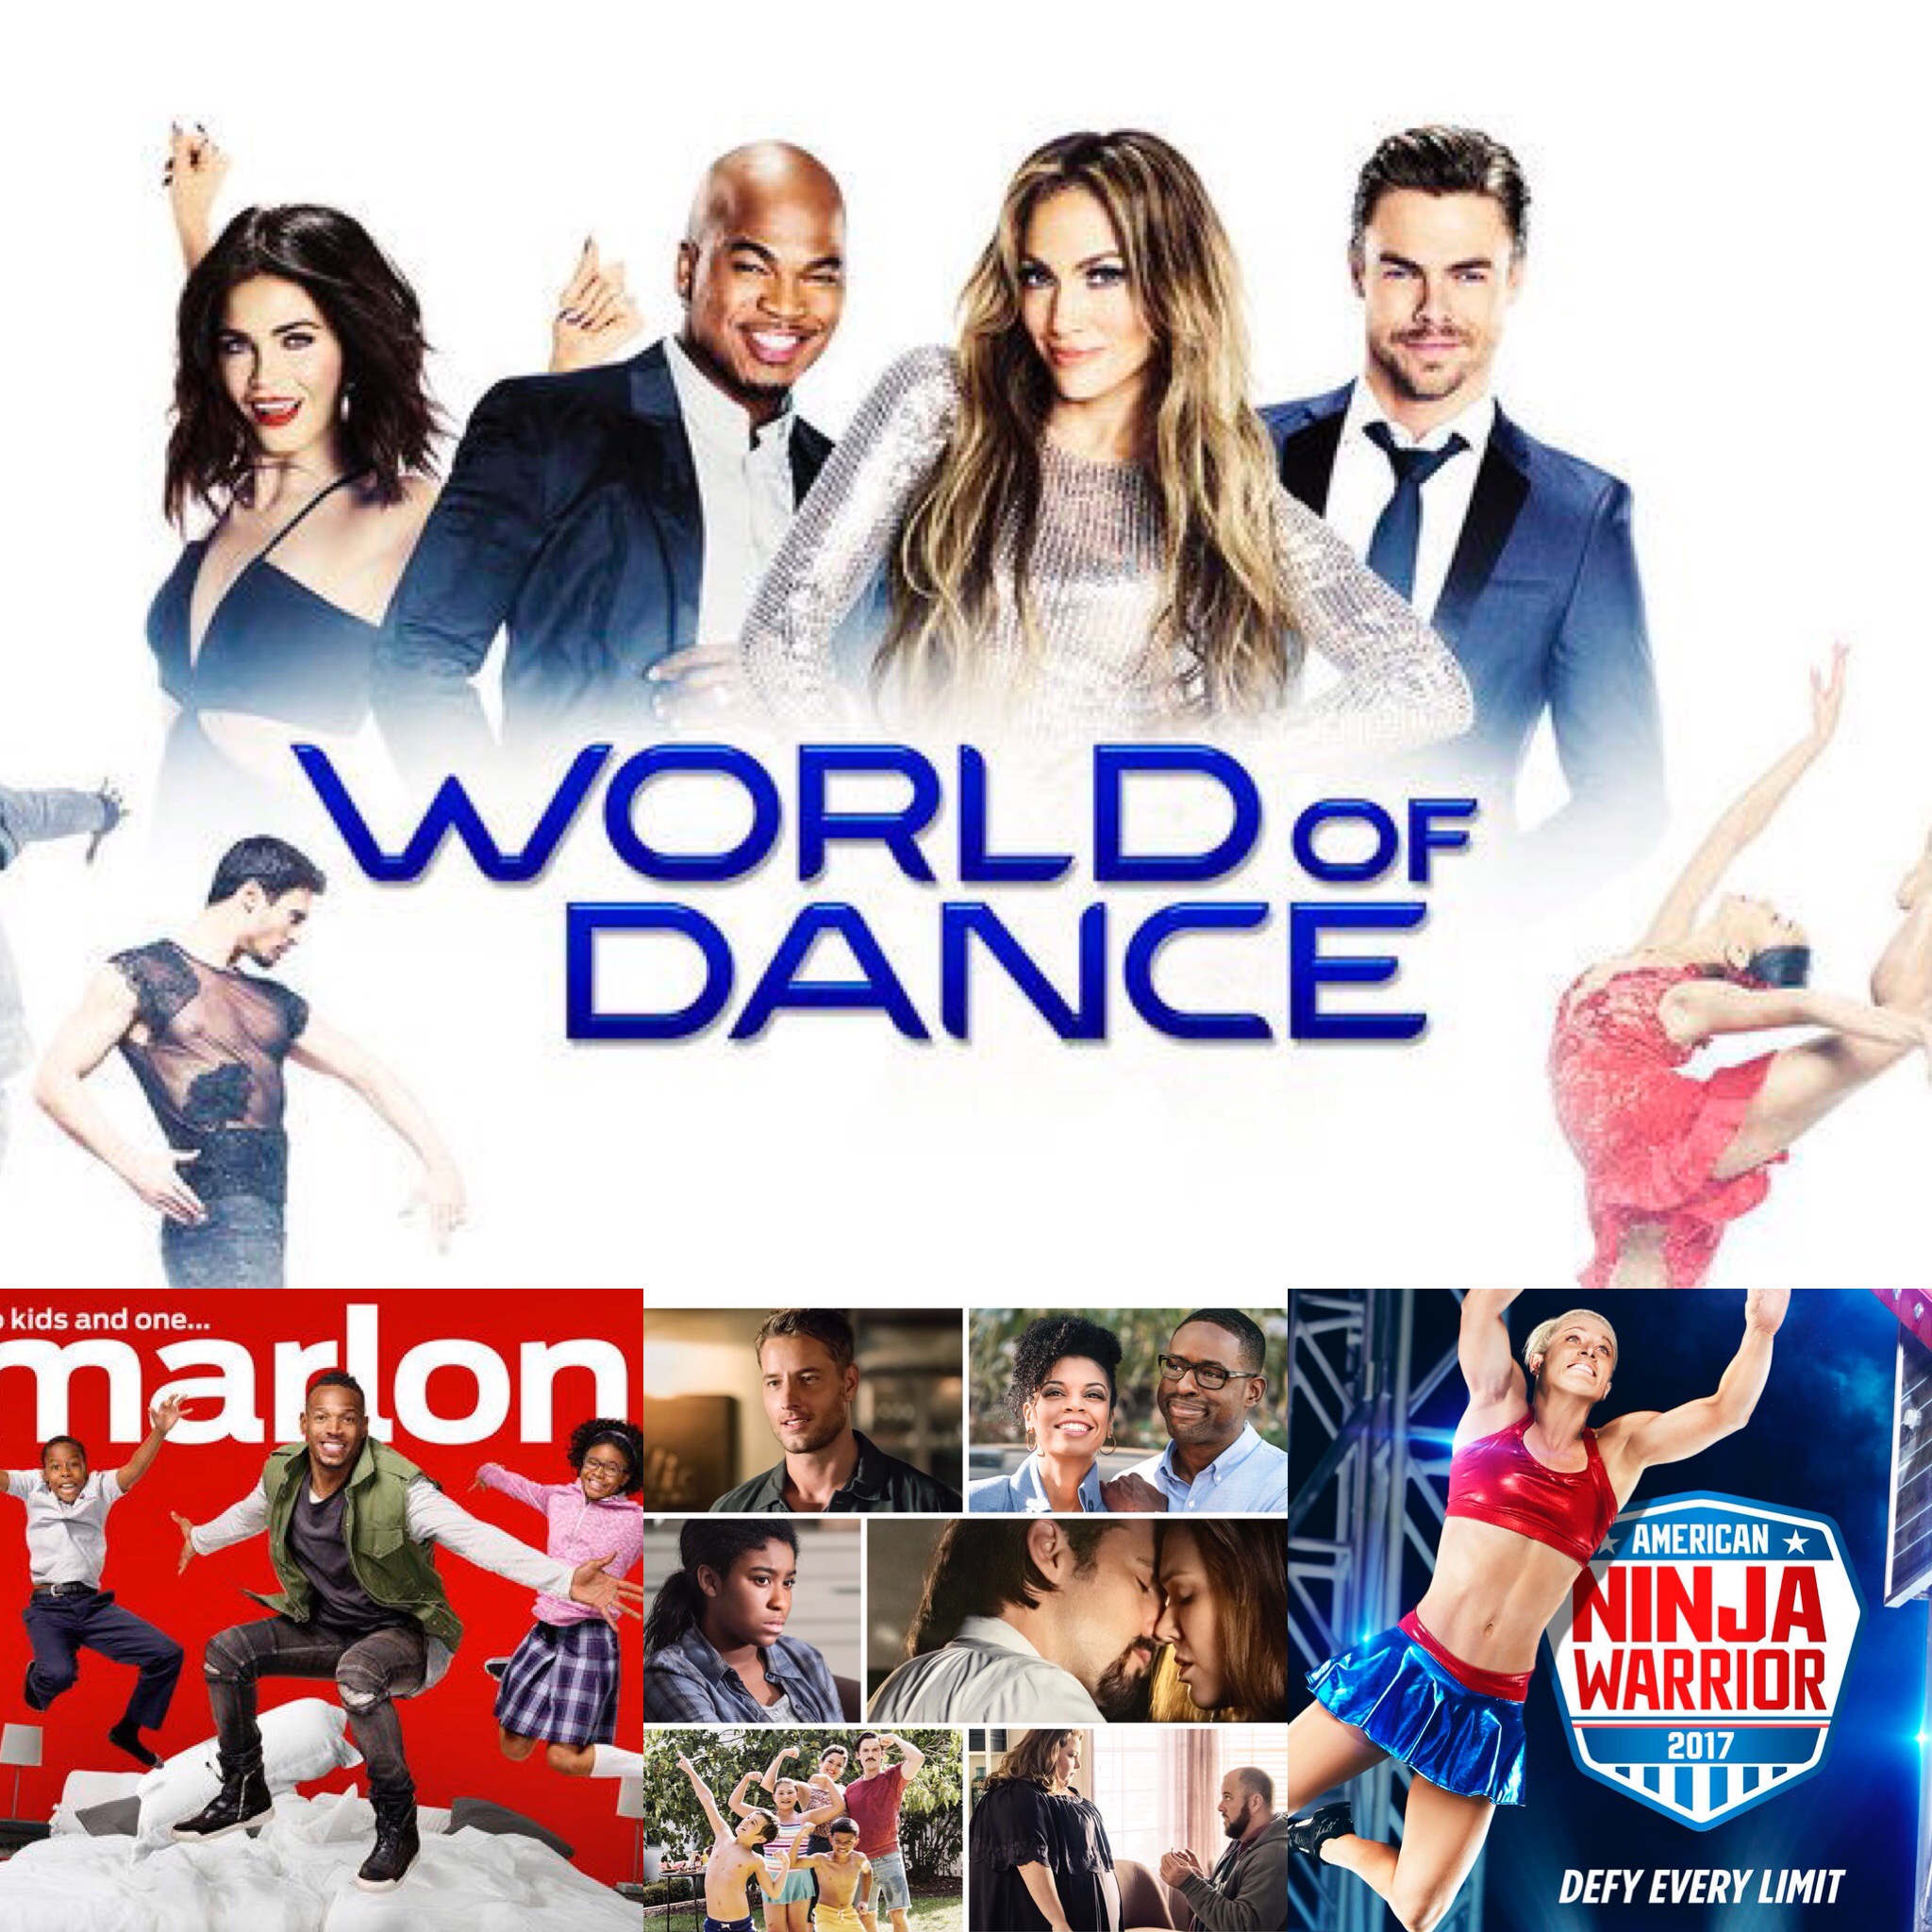 Talking With Tami Off To Los Angeles With NBC/Press Visit With World Of Dance, Marlon & American Ninja Warrior